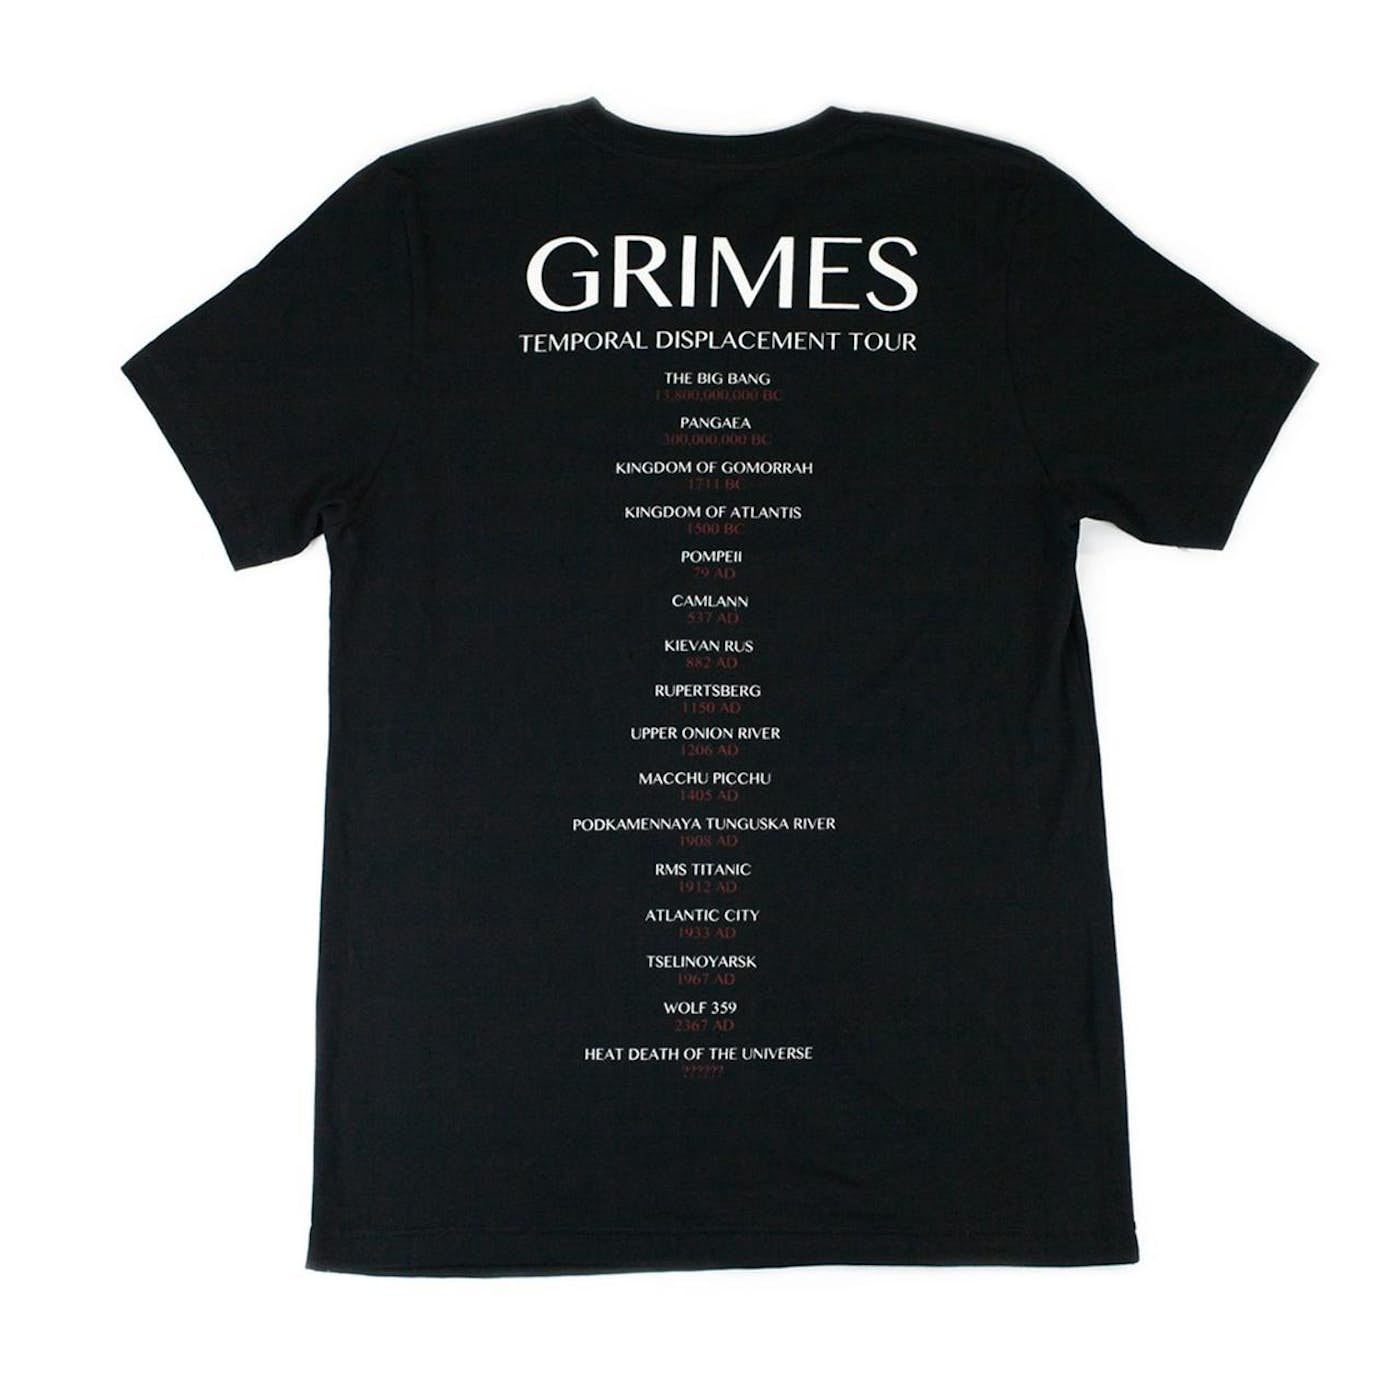 Grimes Rhinestone Cowgirls Tour T-Shirt with Tour Dates